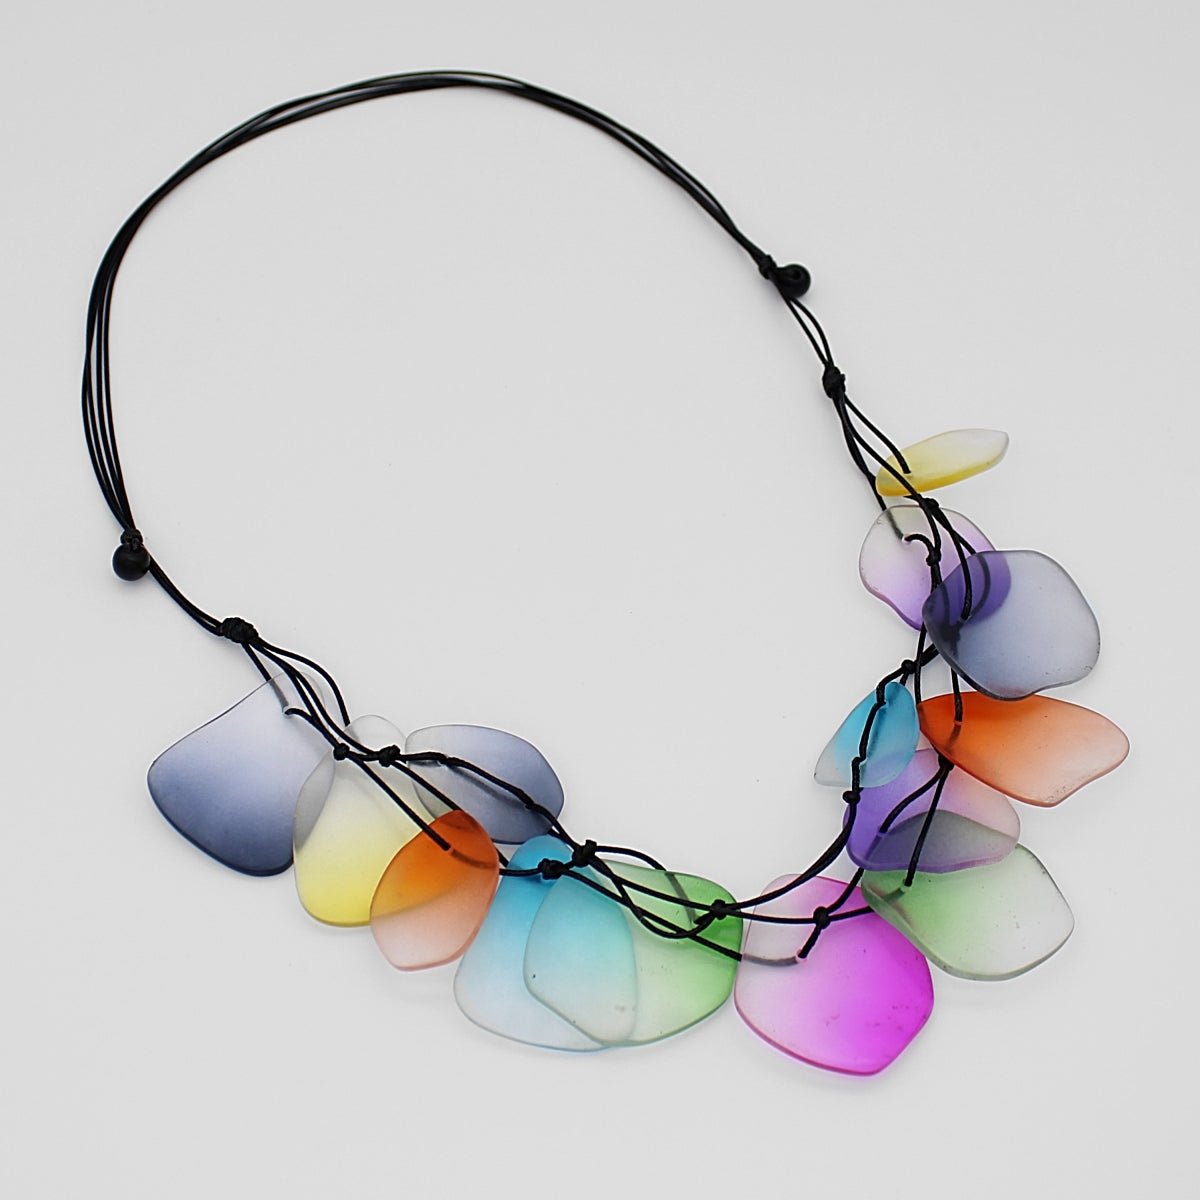 Shawna Shades of Color Necklace